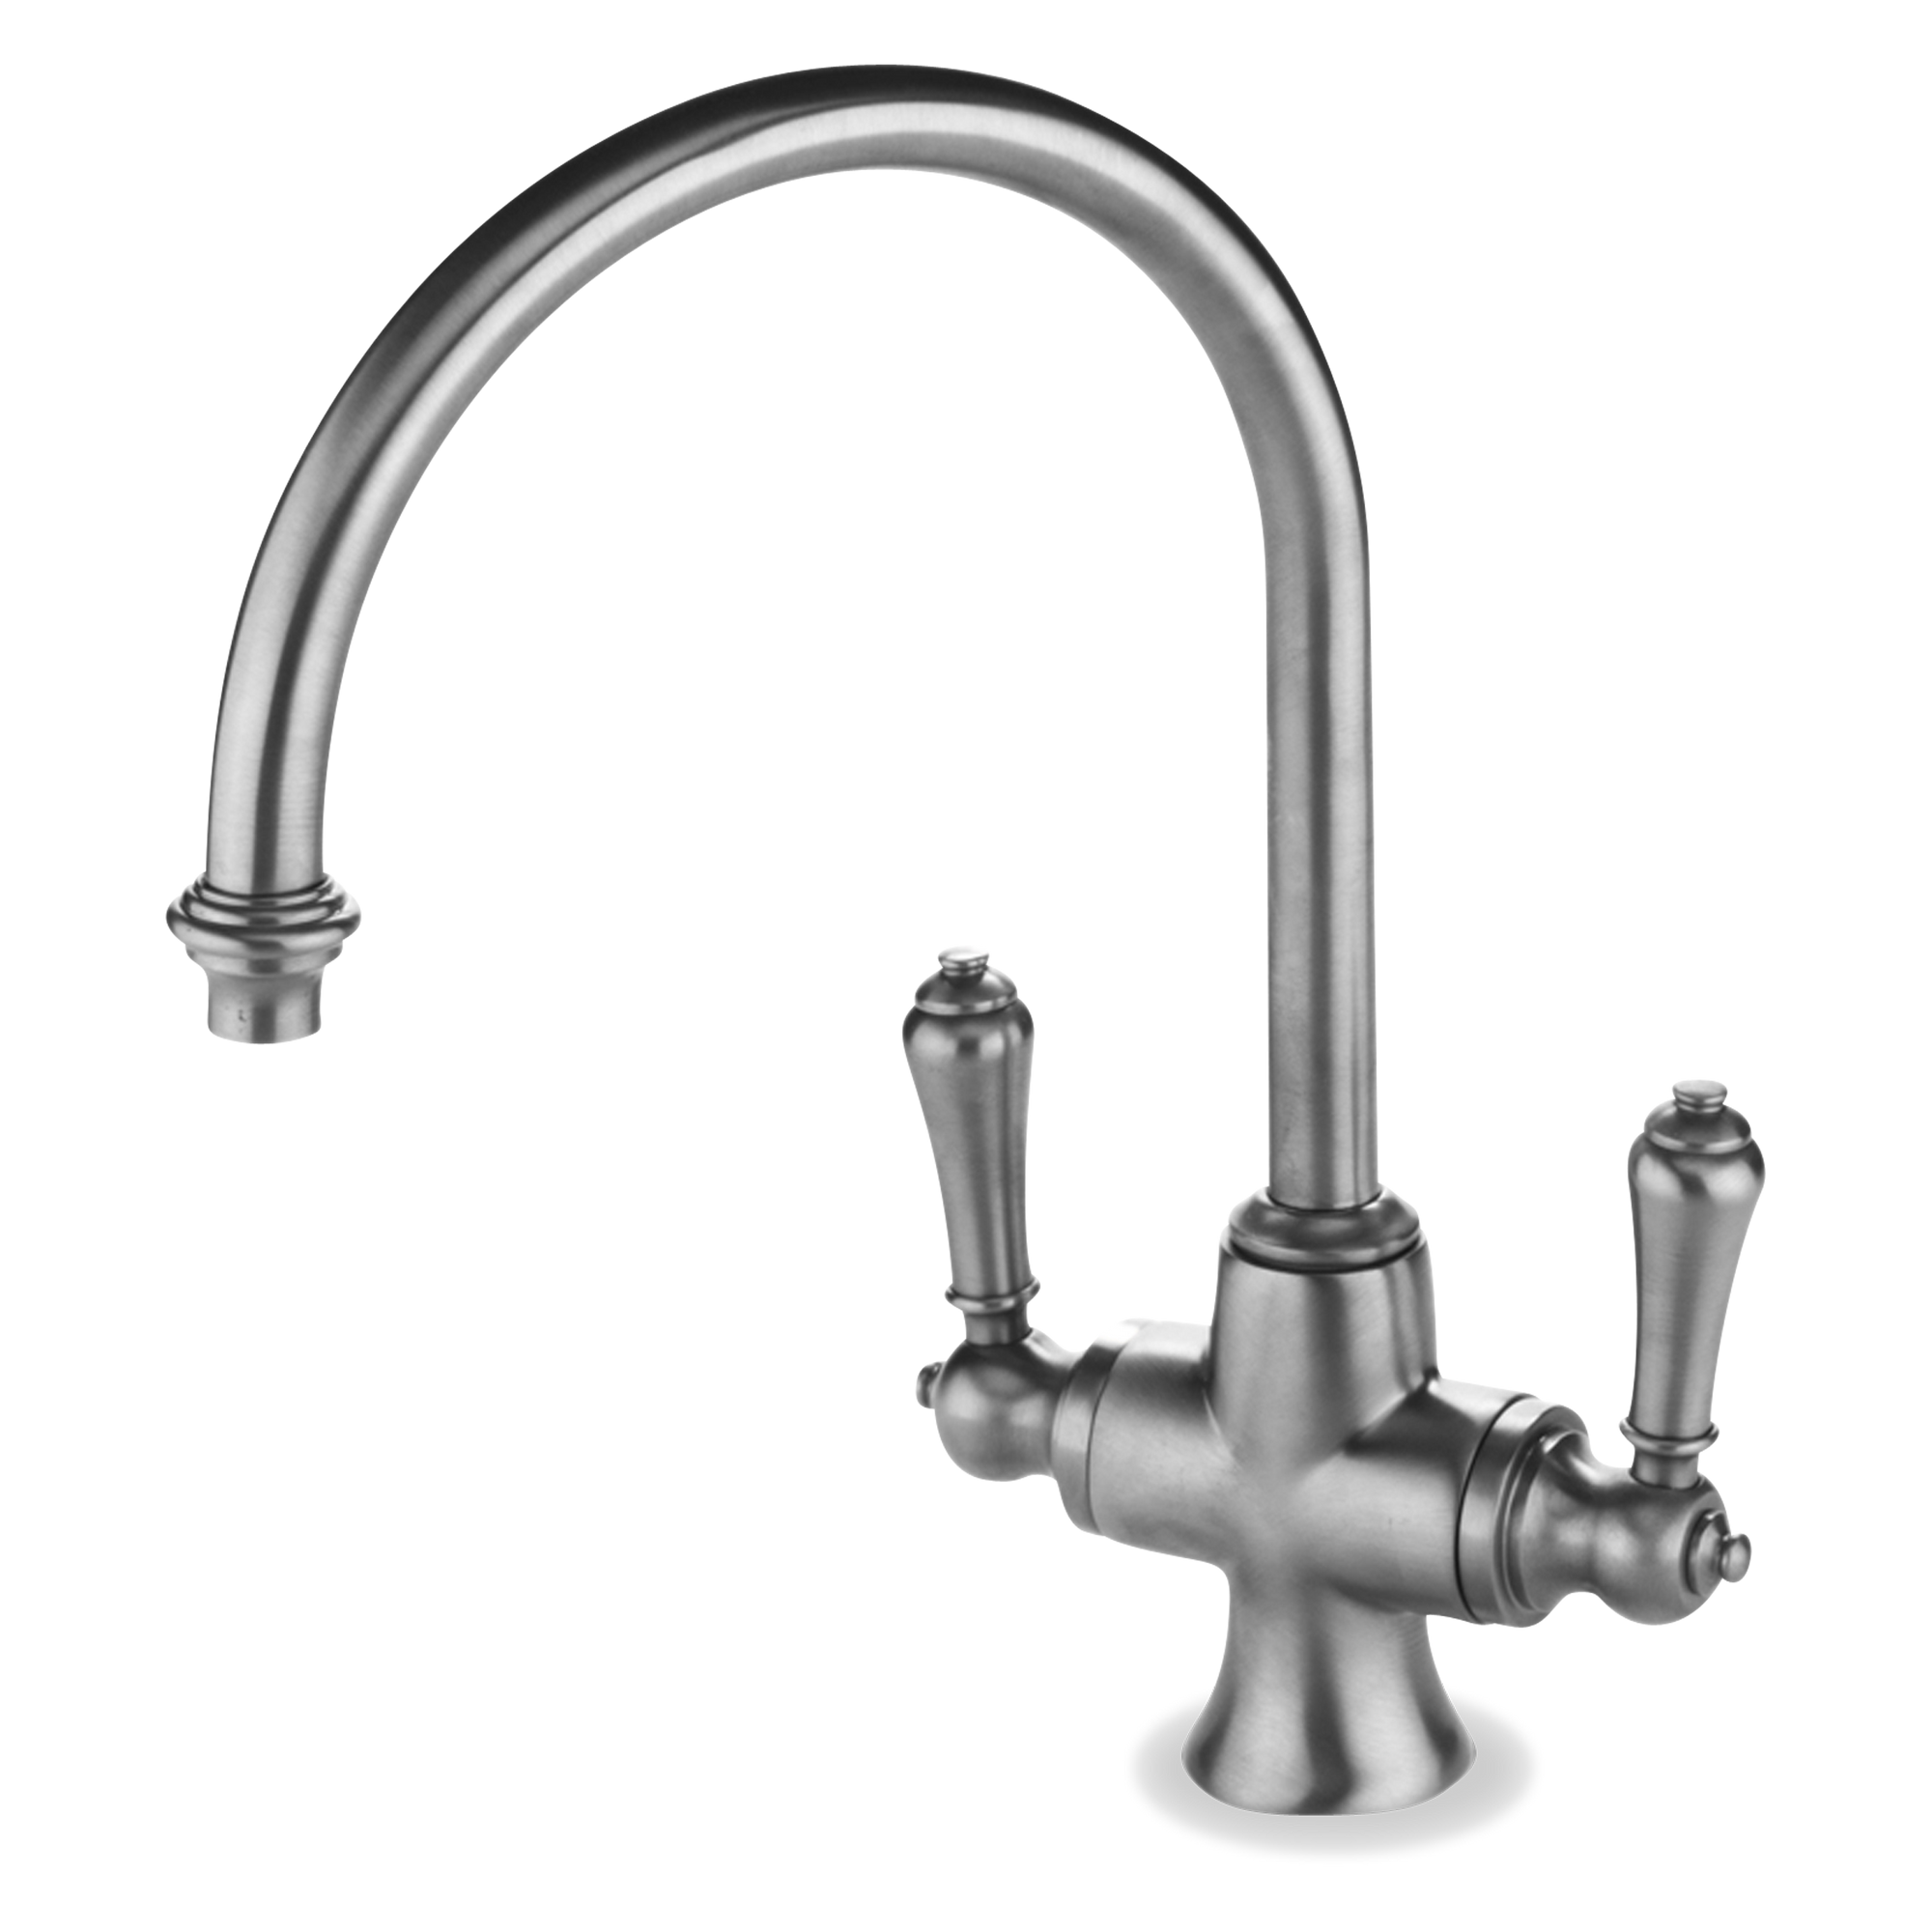 The Calais faucet is an elegant, classic kitchen faucet with a gooseneck spout, hot and cold handles, and an antique copper finish.